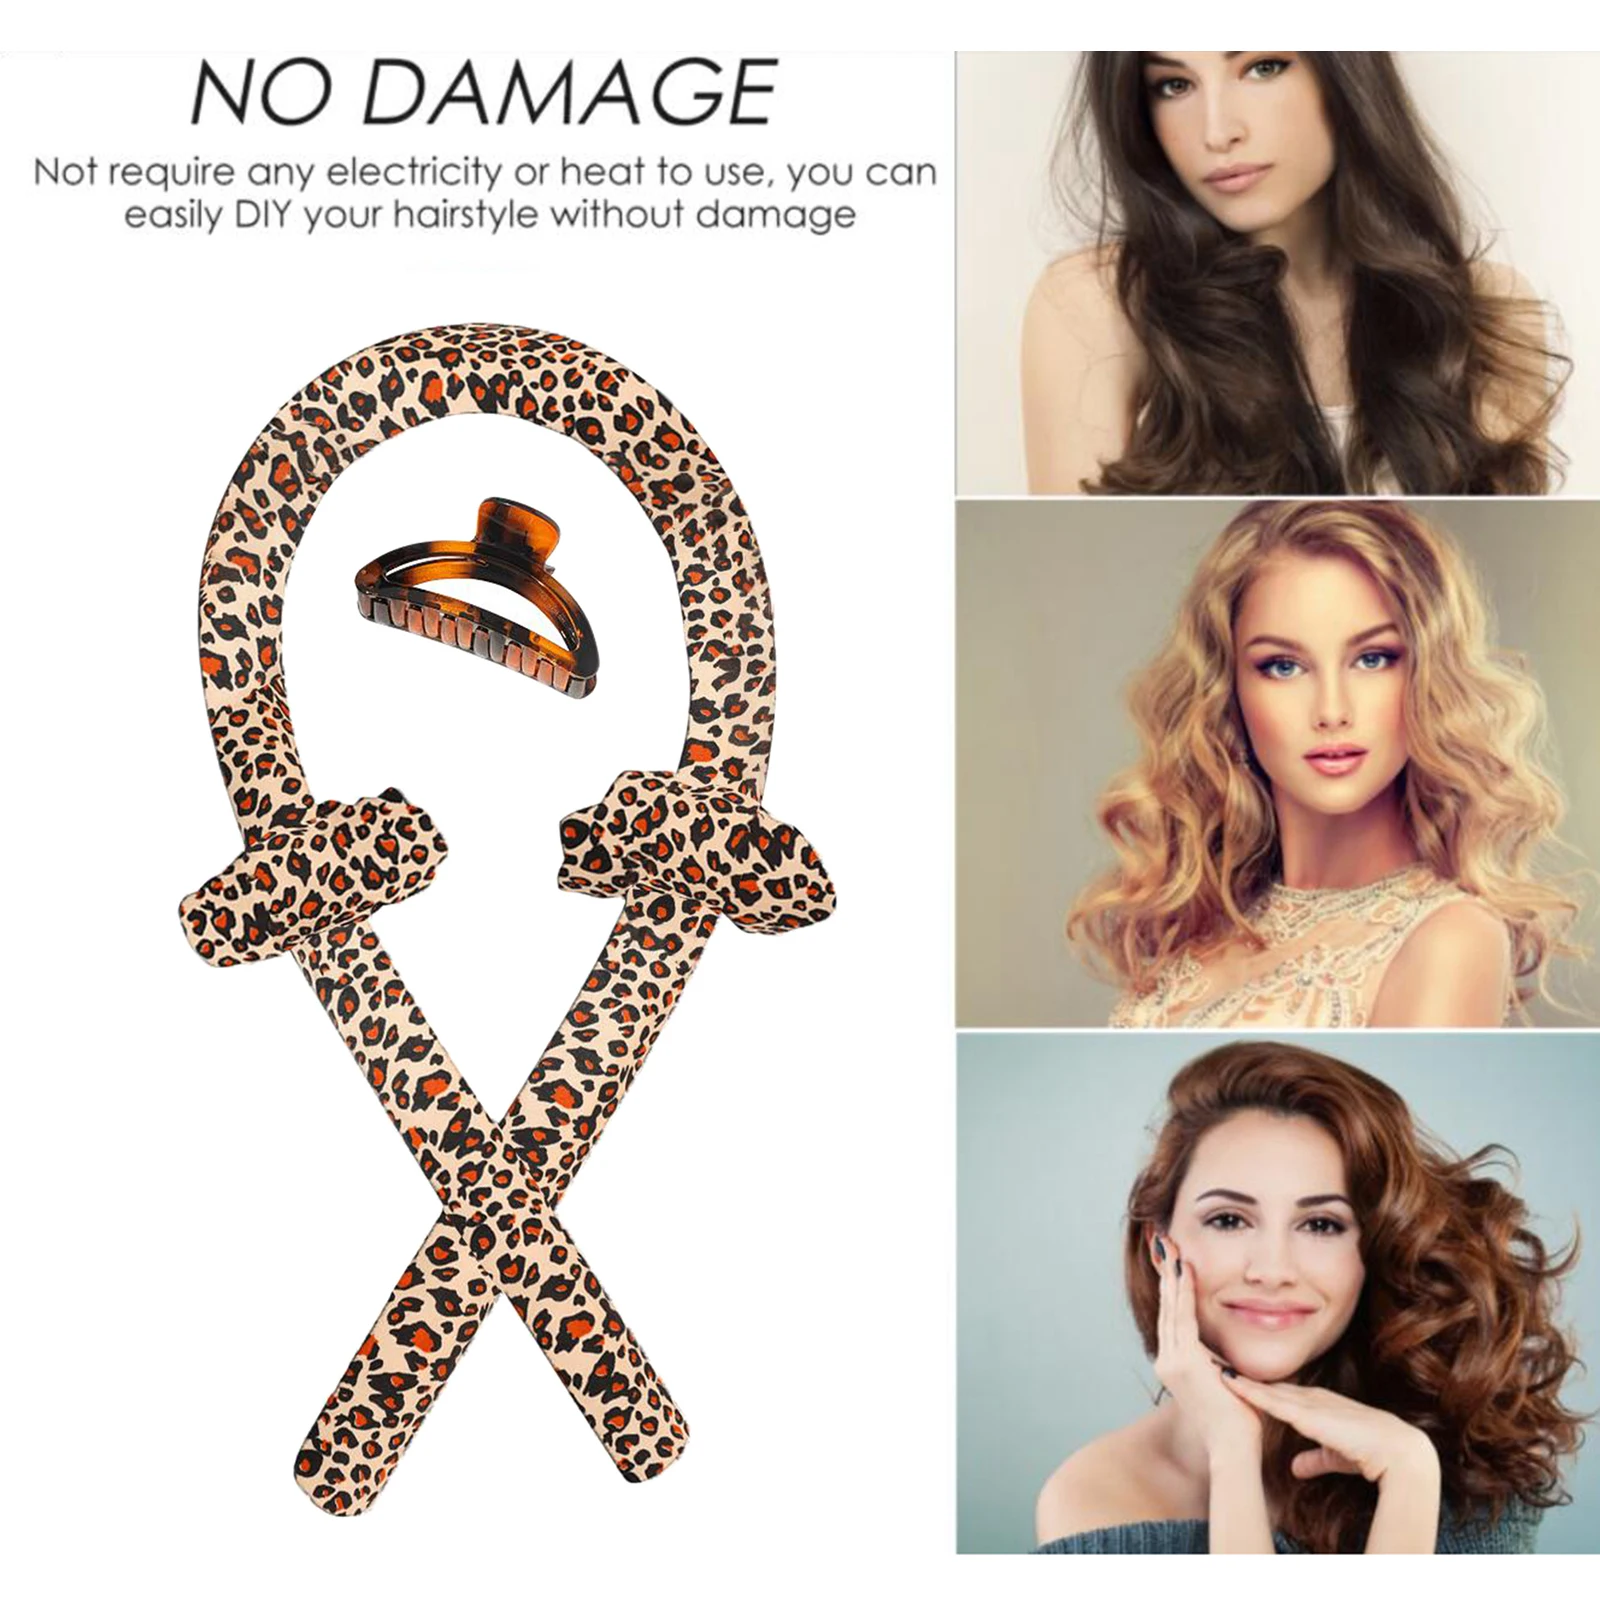 Heatless Curling Rod Hair Roller Sets, Salon Hair Dressing Curlers, Hair Curlers Make Hair Soft And Shiny (Leopard)